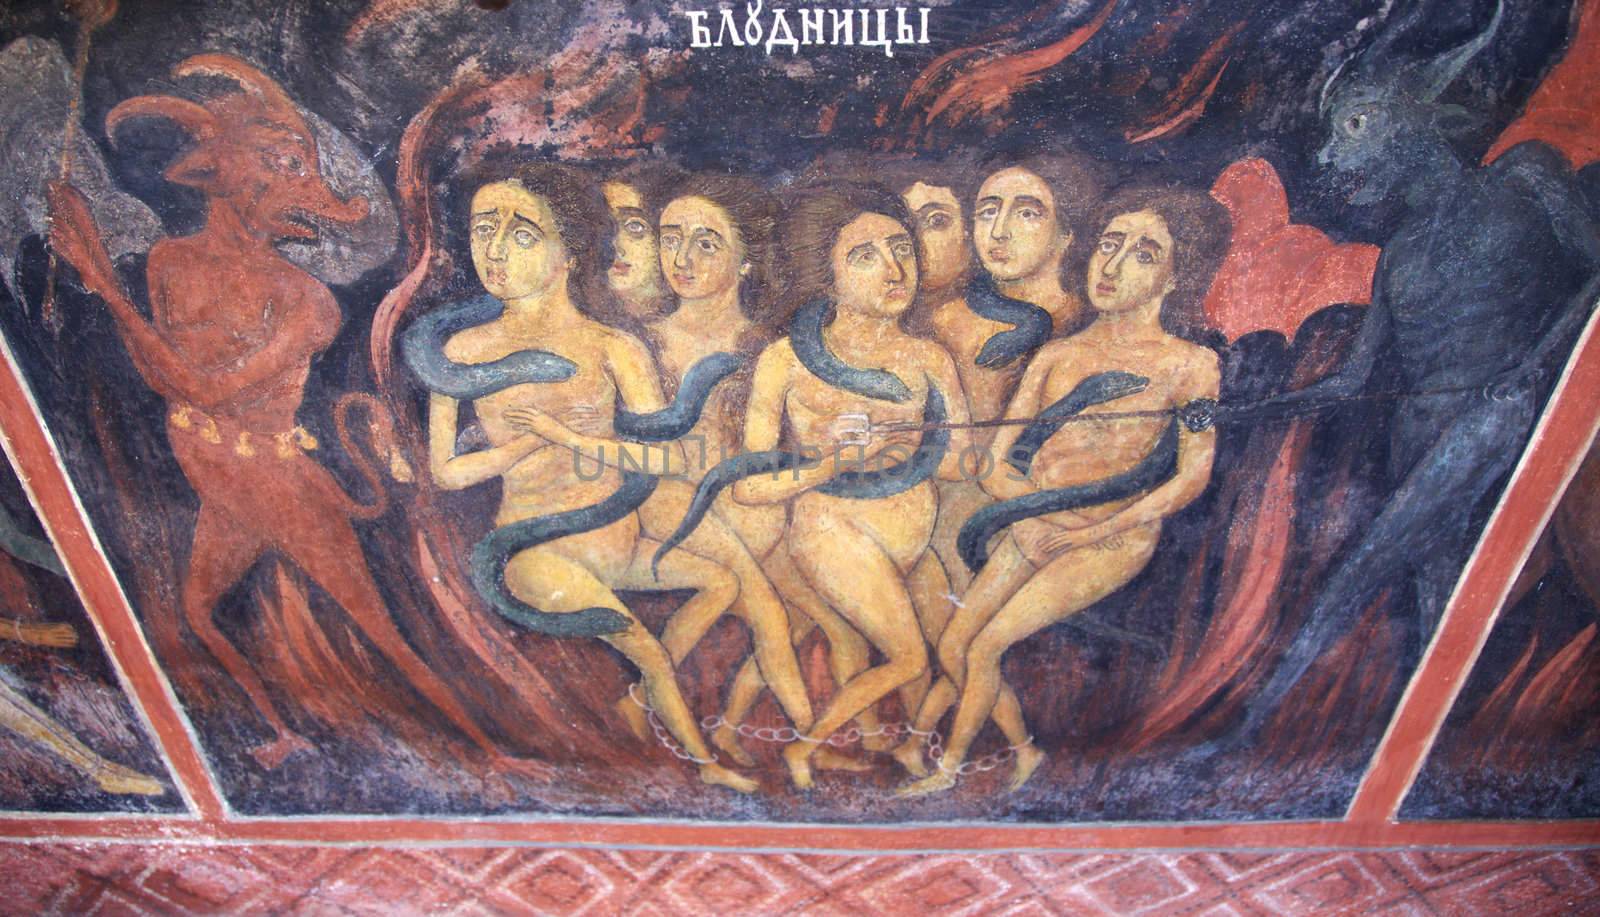 licentious women in hell scene frescos on the facade of church The Nativity of the Virgin in Rila monastery, painted 1840-1847